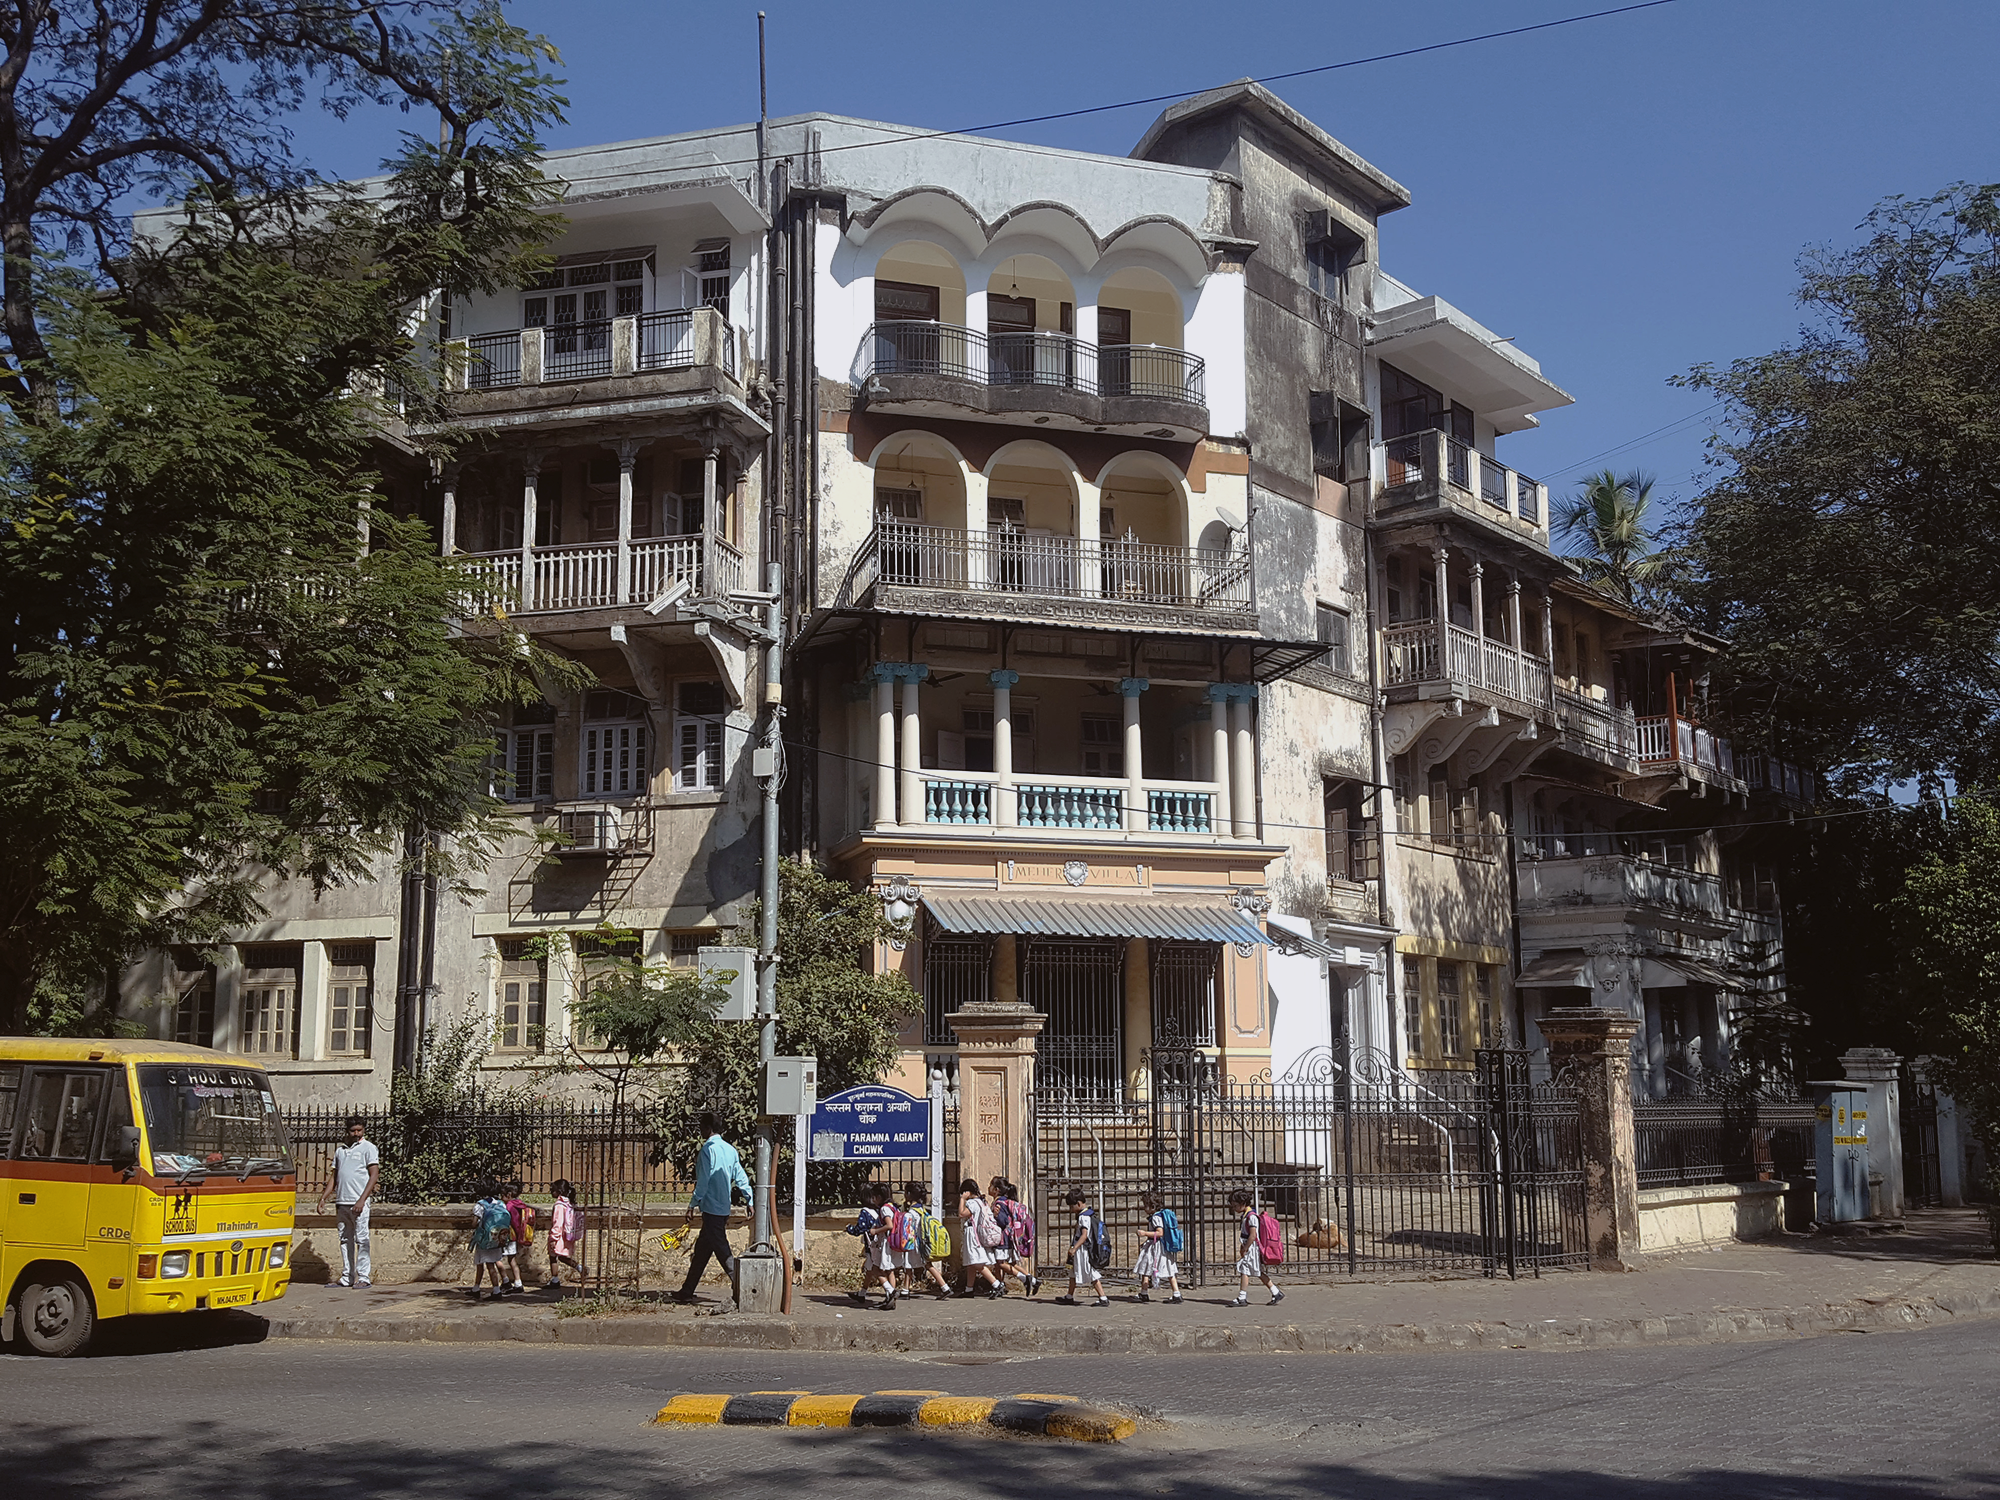 Old-world buildings in Southern Mumbai